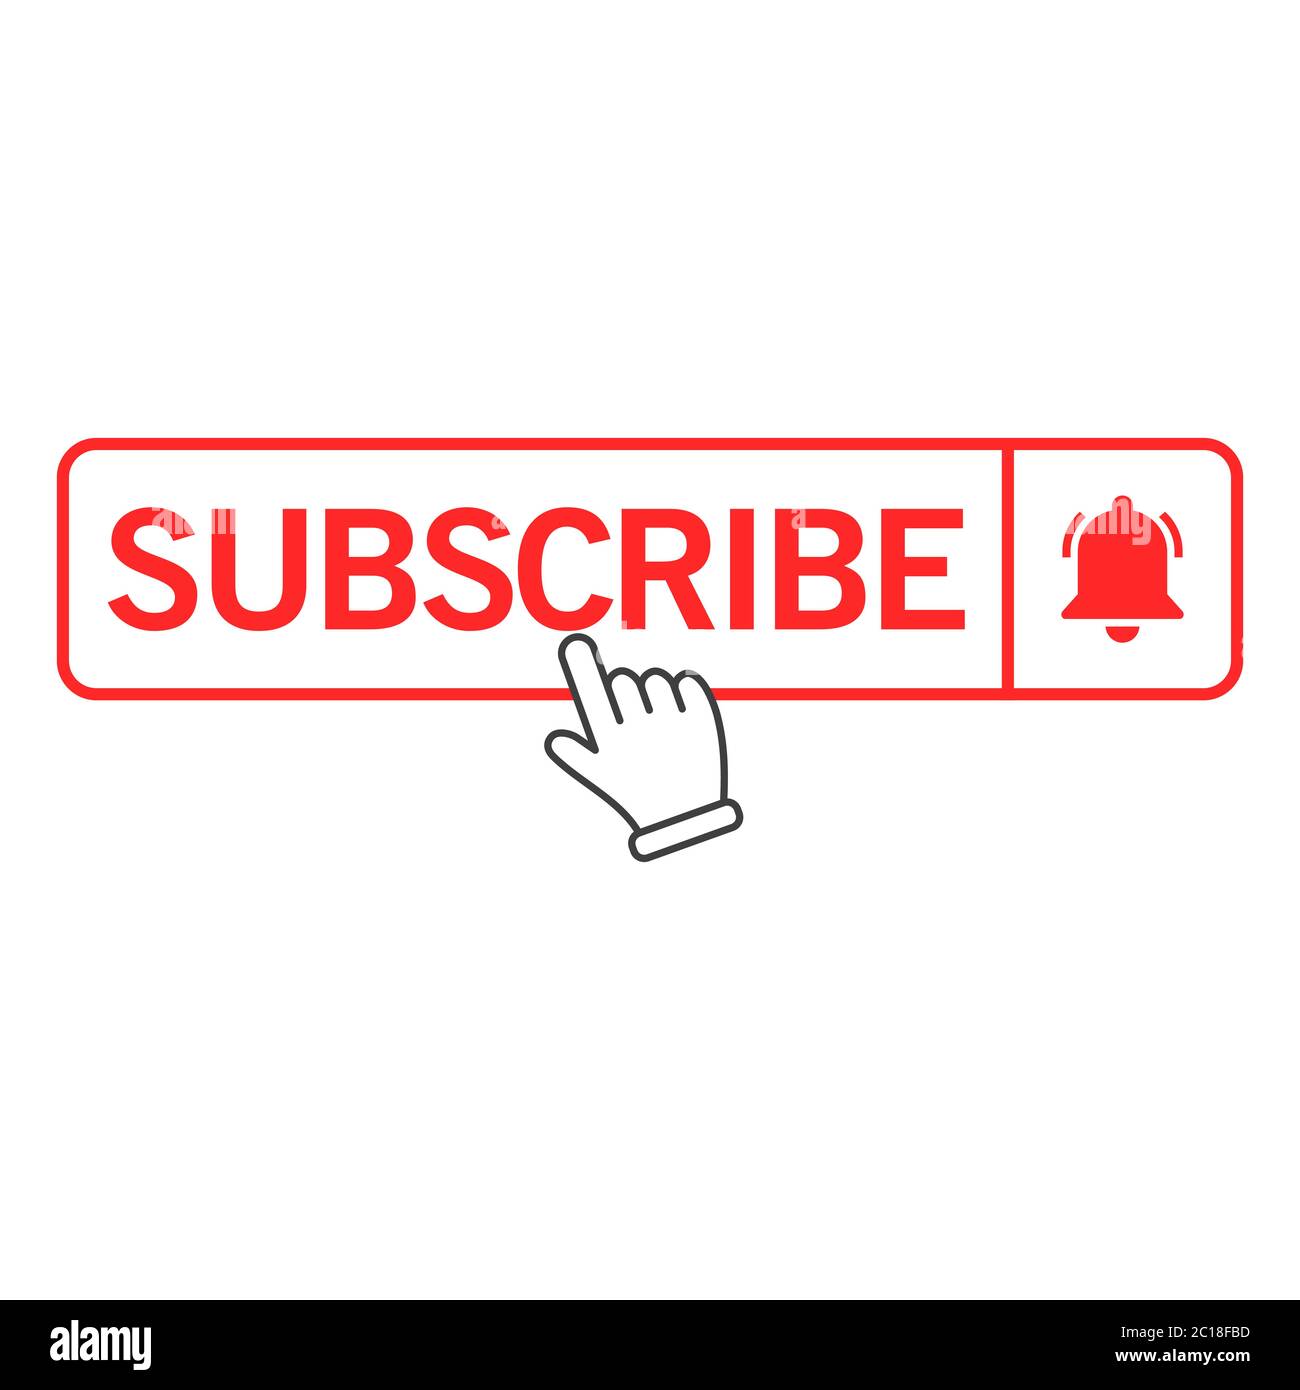 Vector illustration of the subscribe button. Suitable for design elements of video channels, broadcast promotion and entertainment media notification. Stock Vector